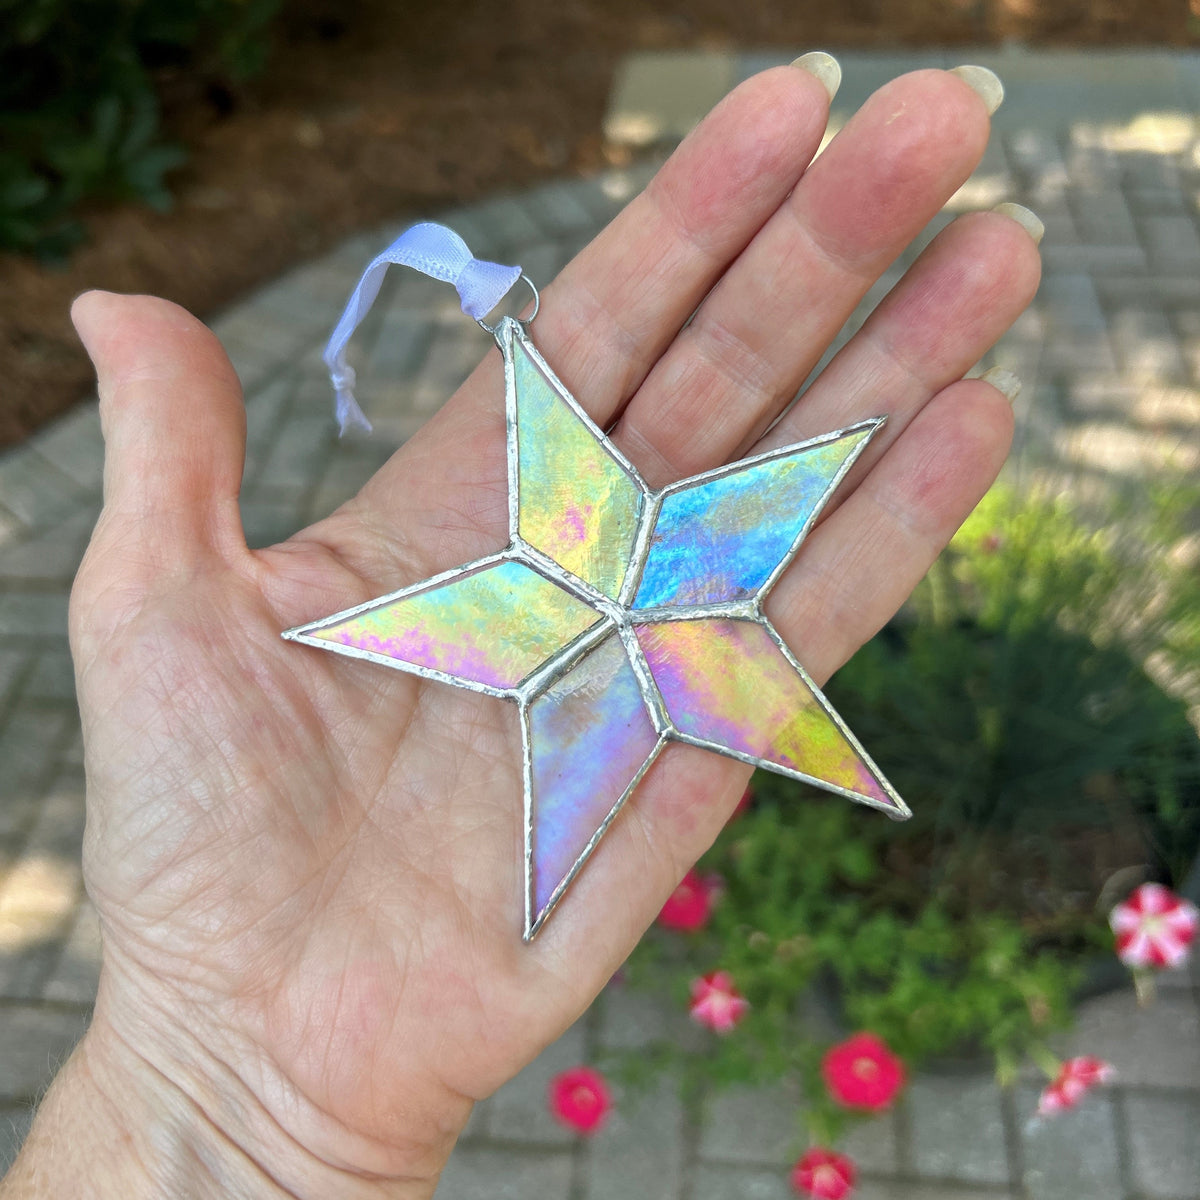 Clear iridescent star held in hand.